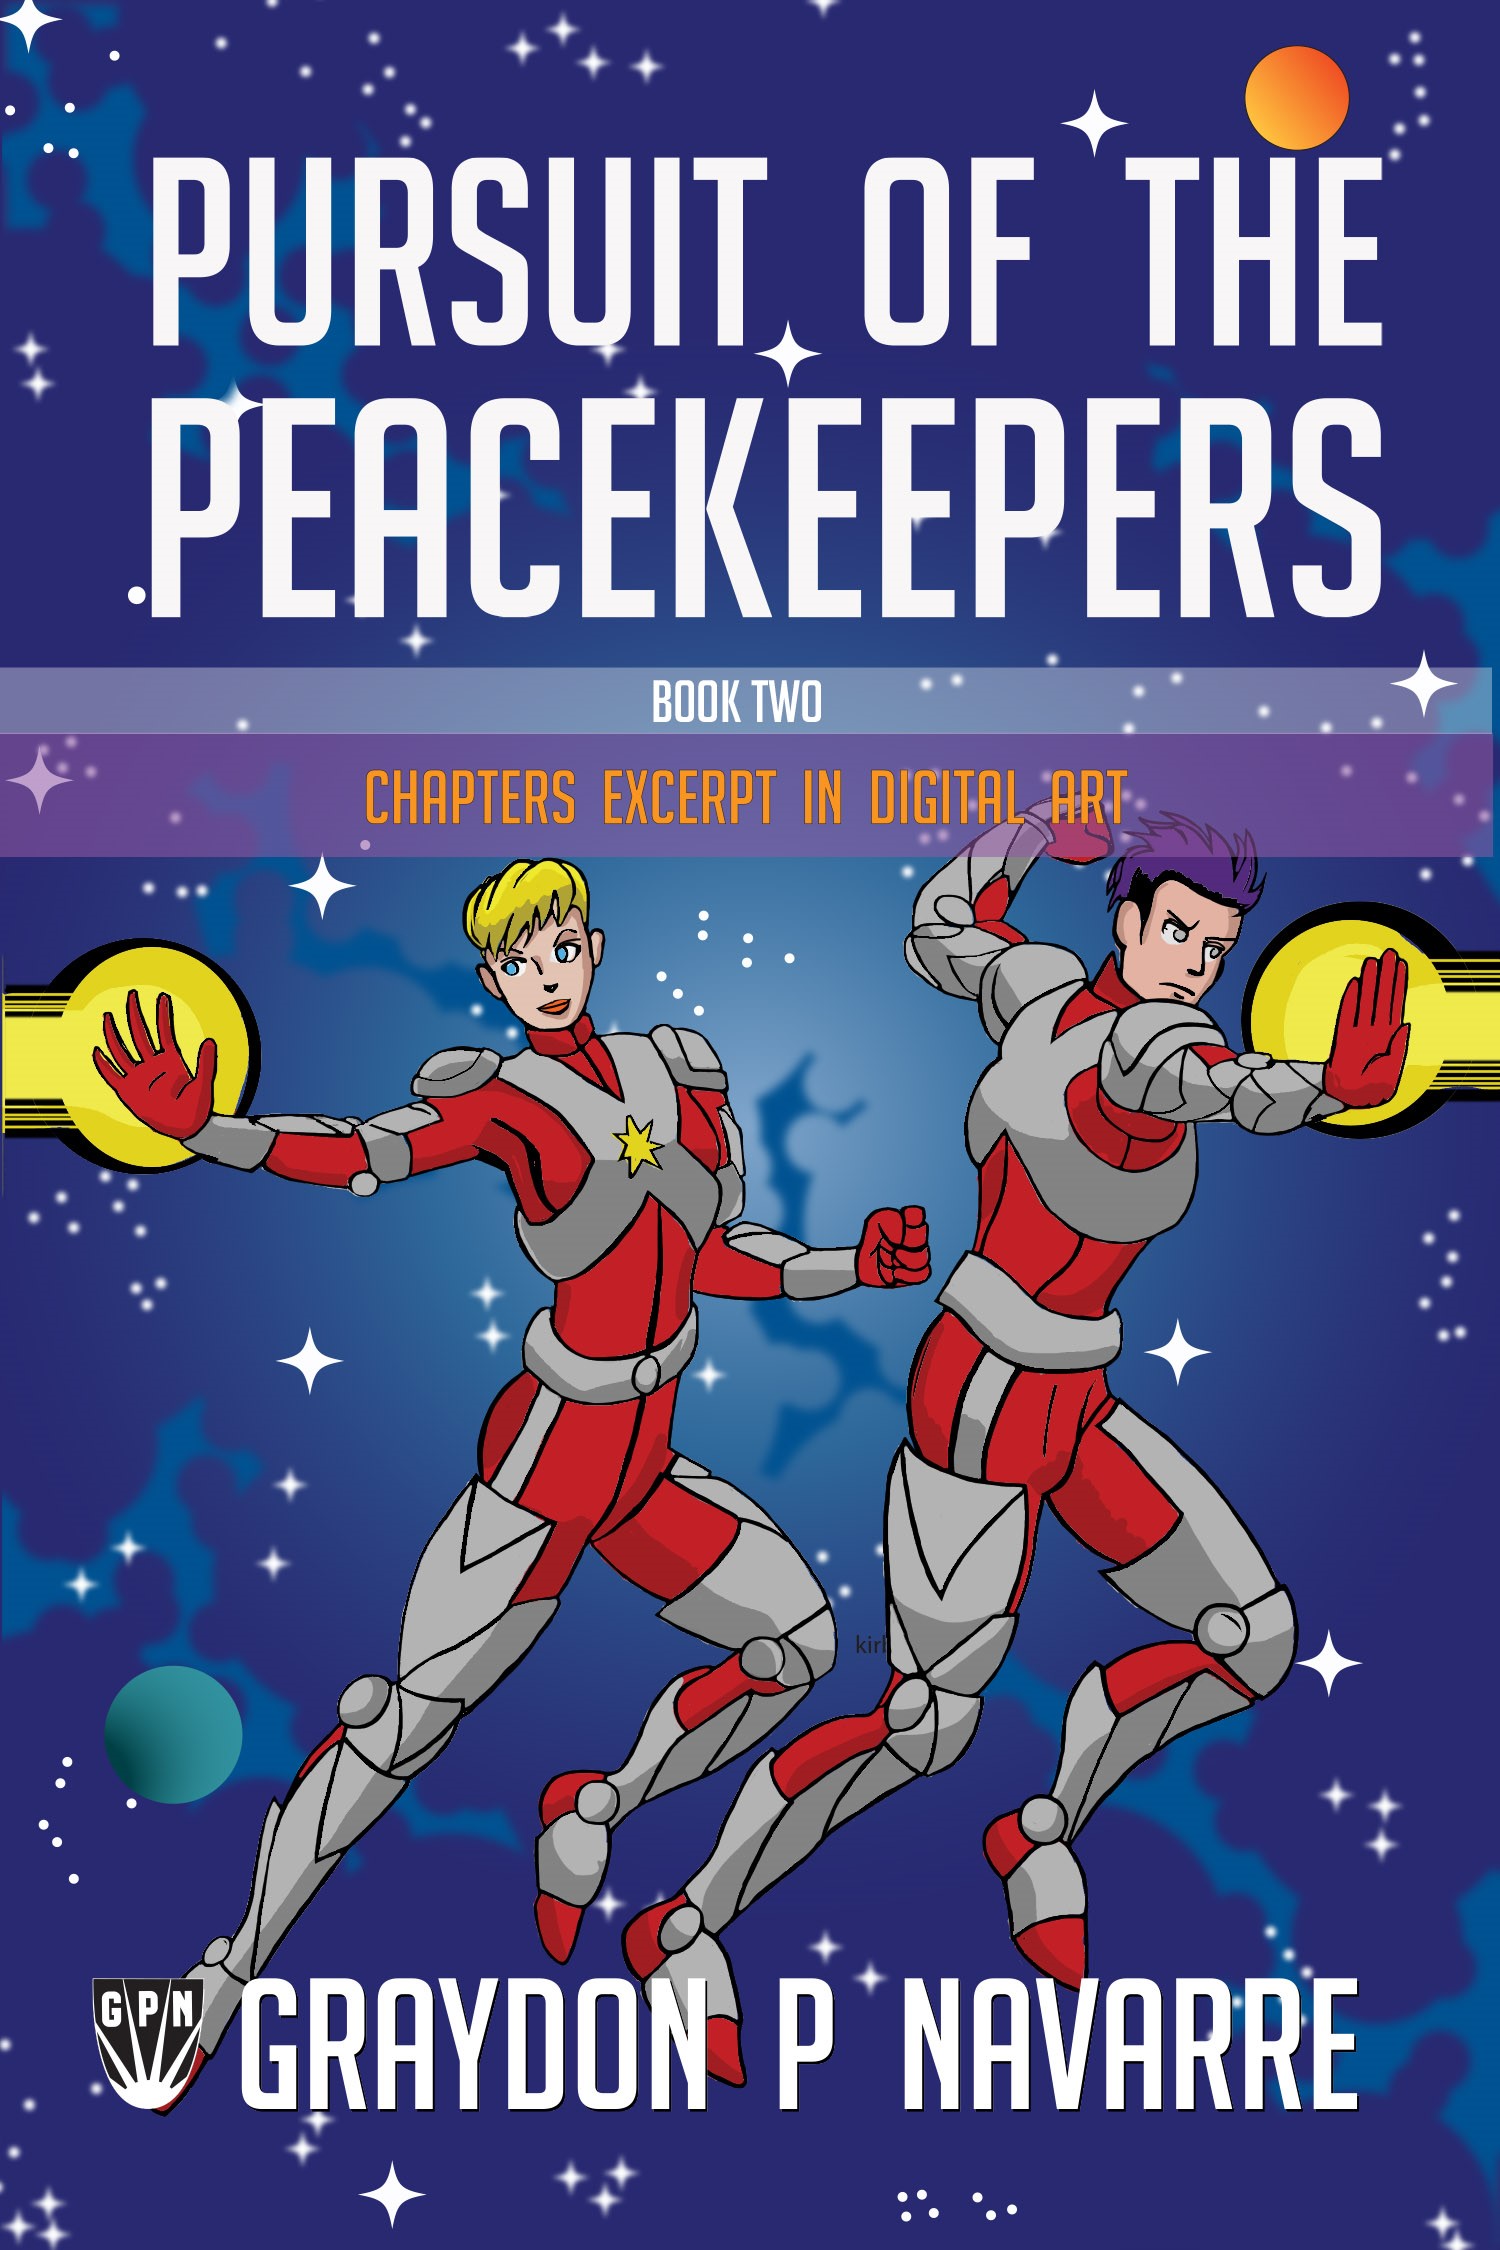 Pursuit of the Peacekeepers – ArtWork